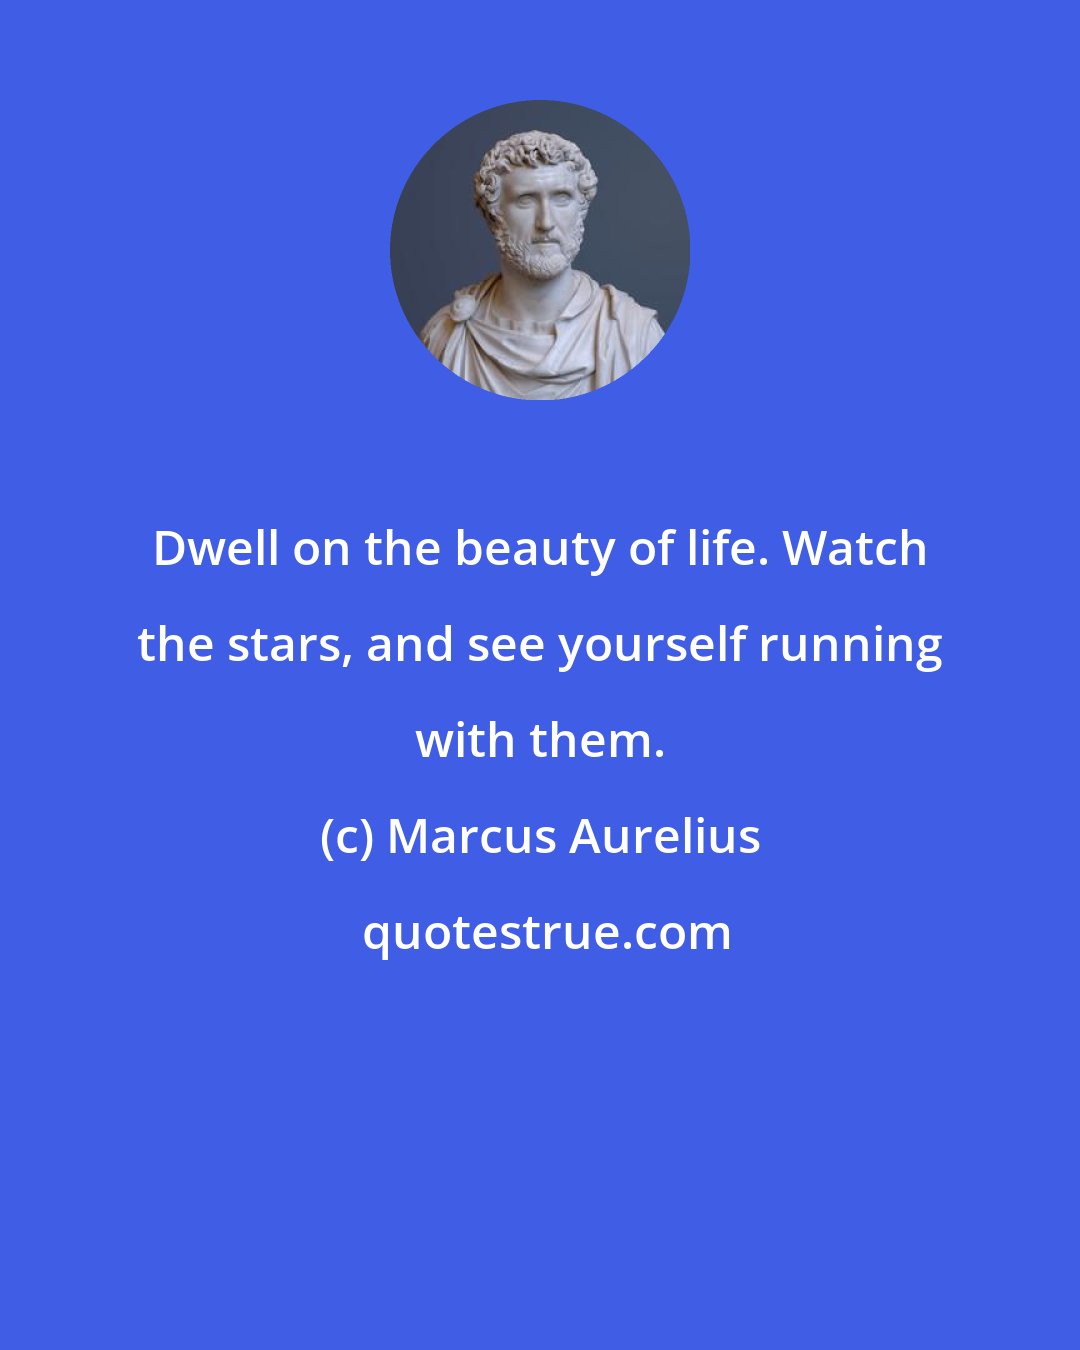 Marcus Aurelius: Dwell on the beauty of life. Watch the stars, and see yourself running with them.